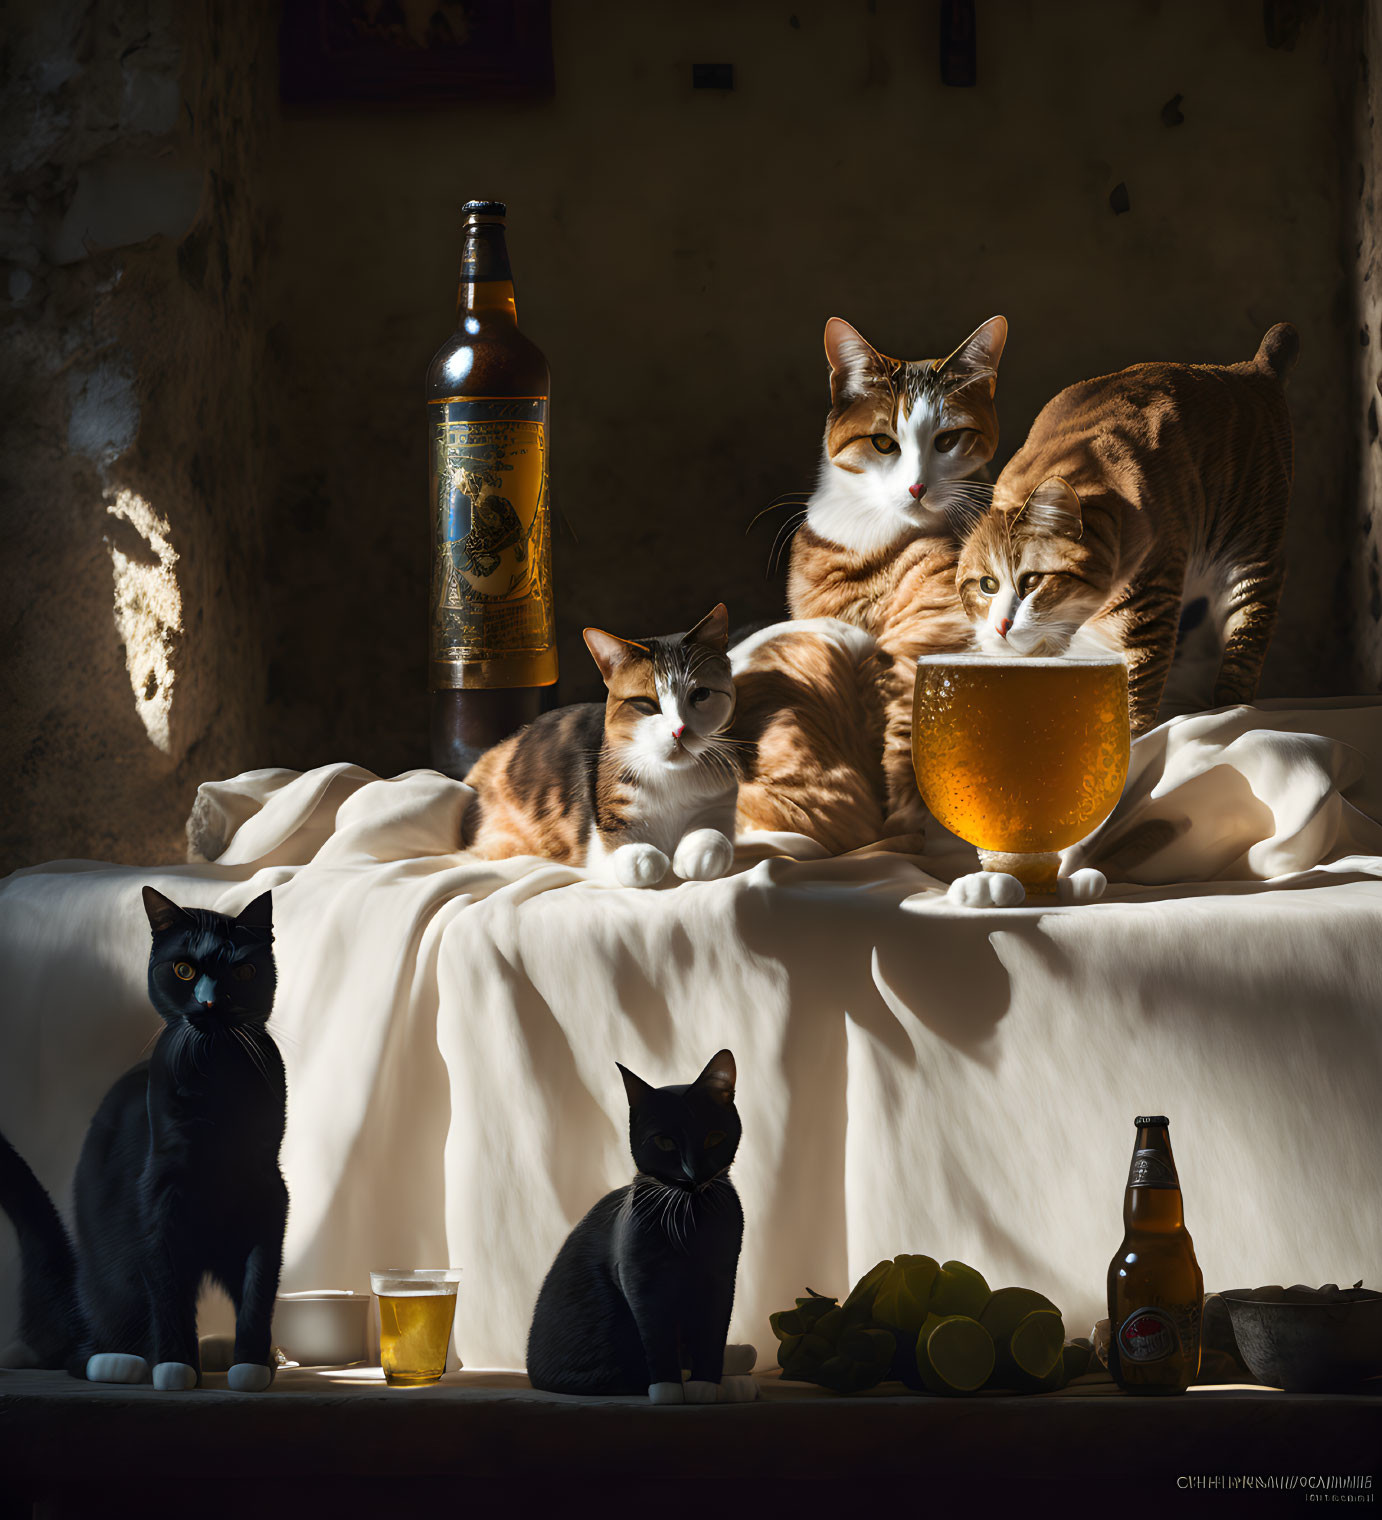 Four Cats Relaxing with Beer and Limes on Table